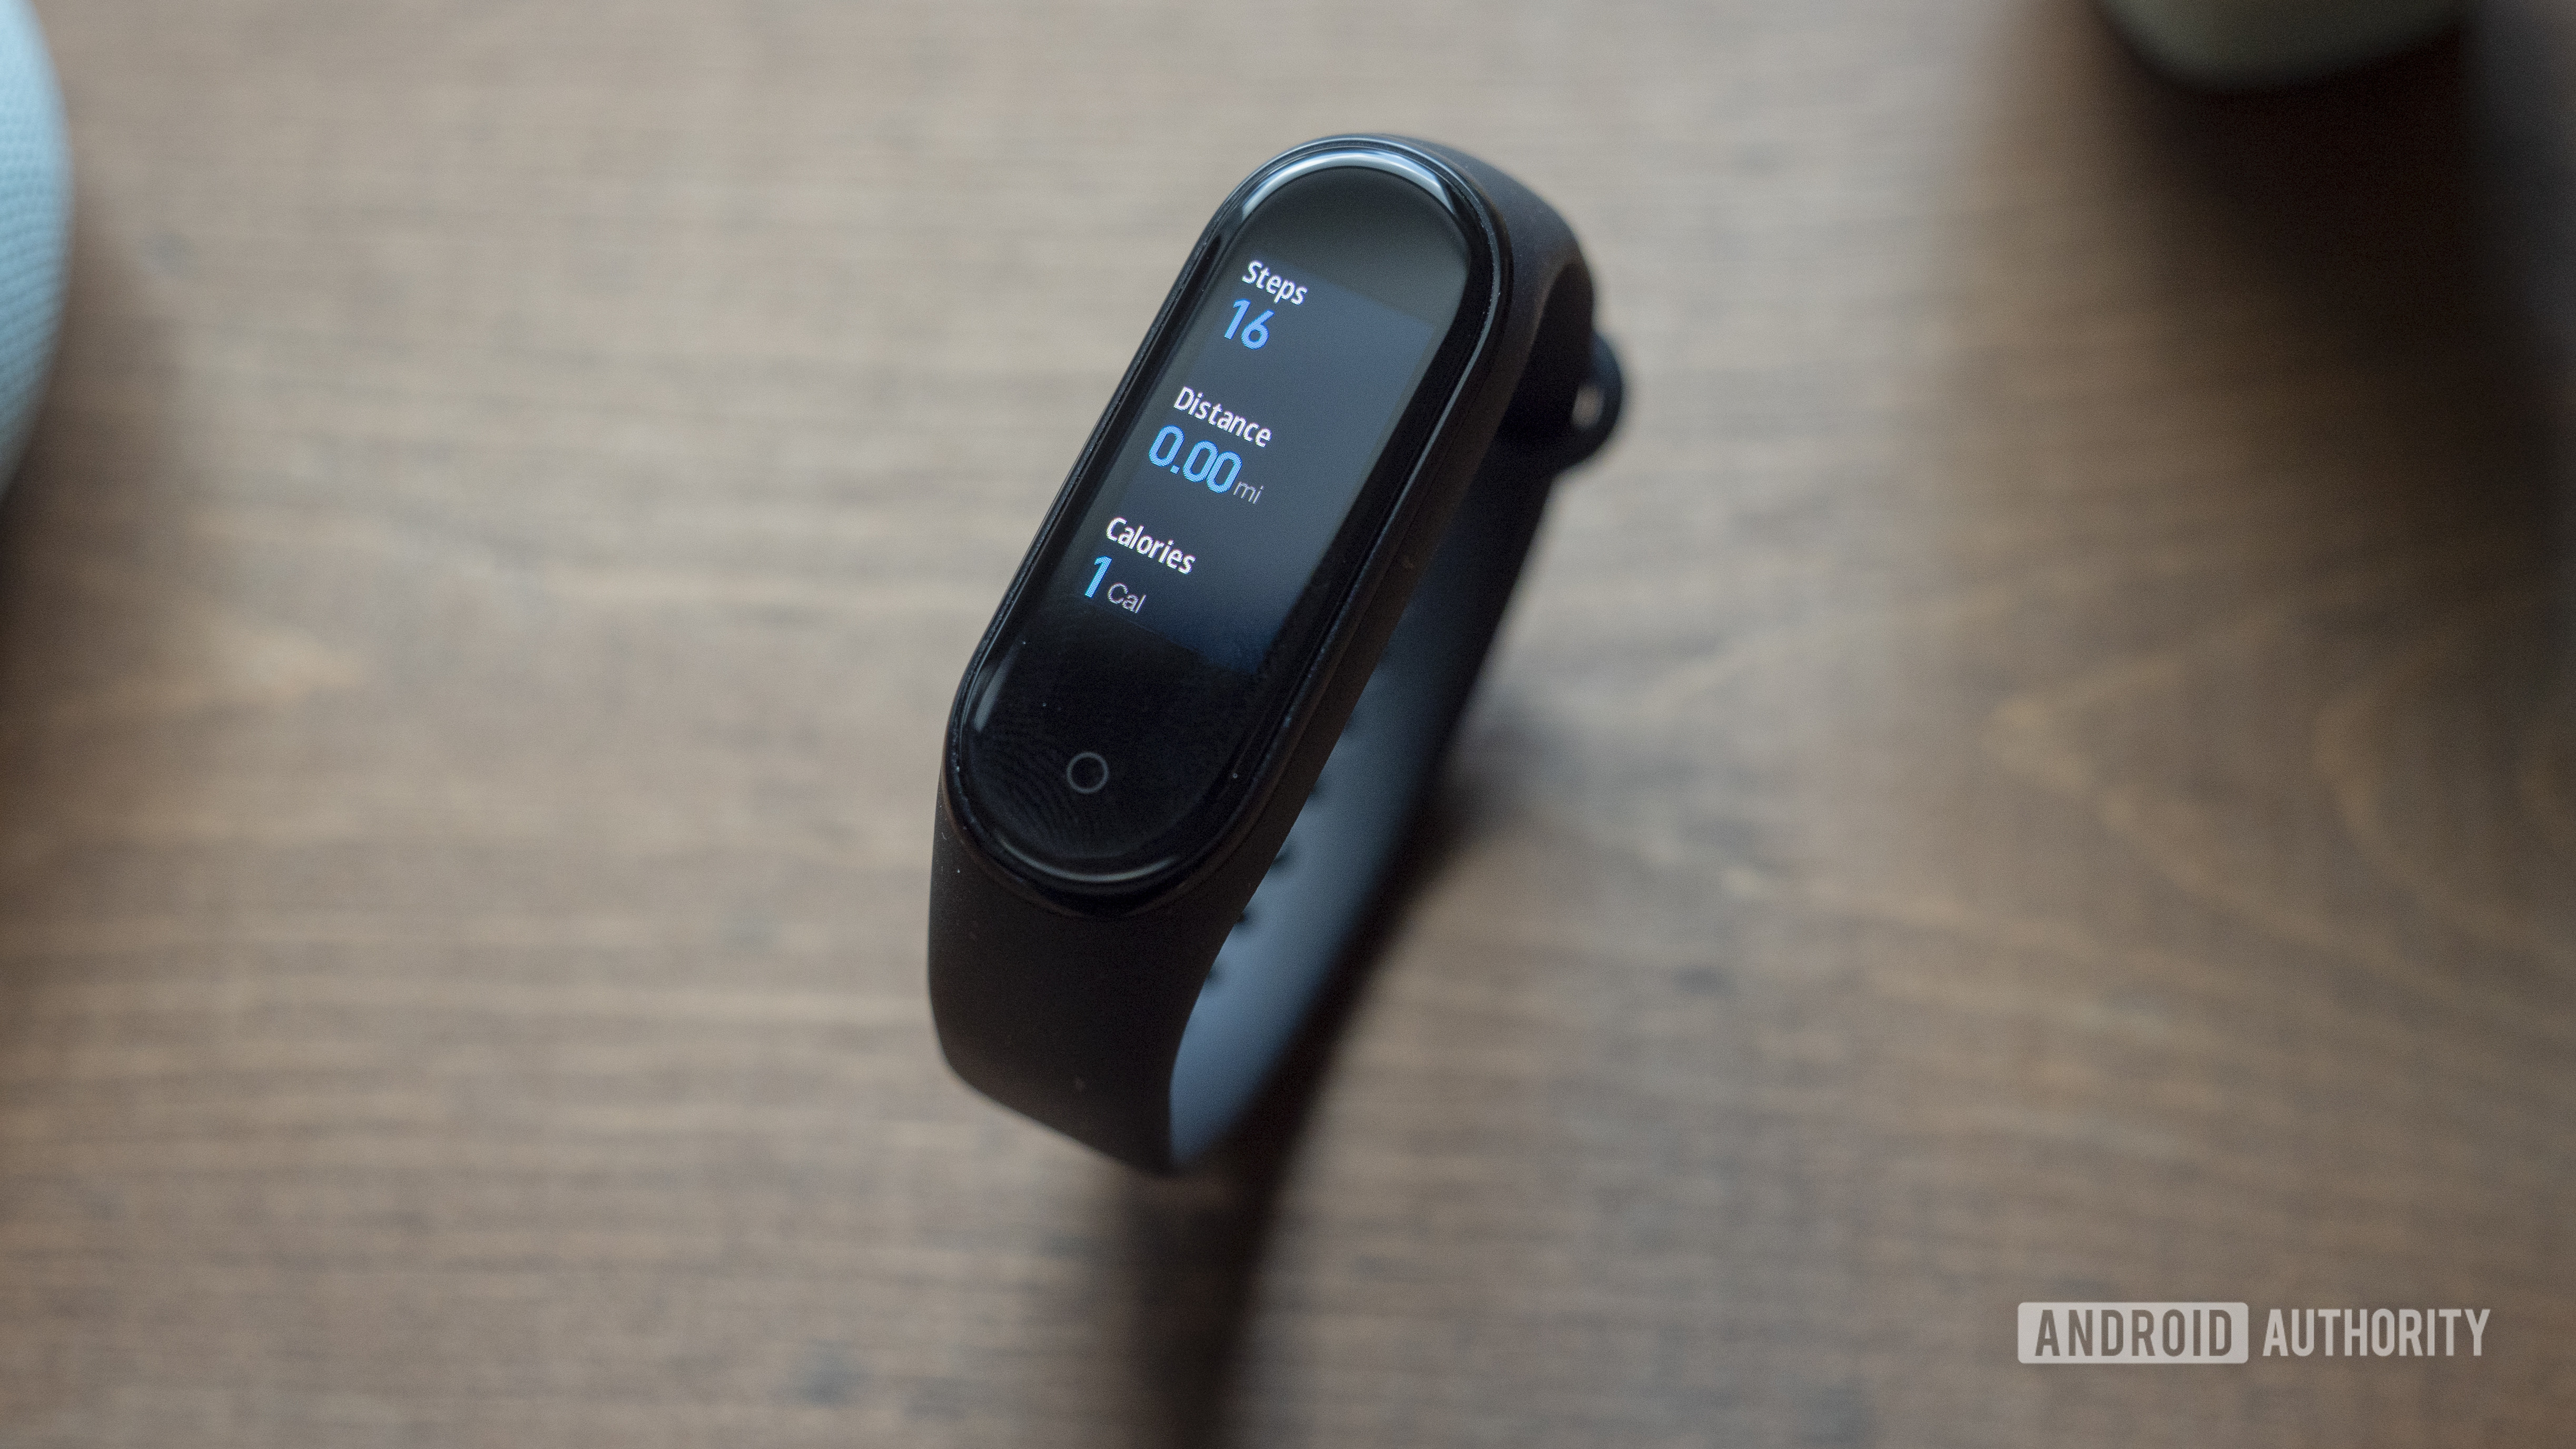 xiaomi mi band 4 review status steps daily activity